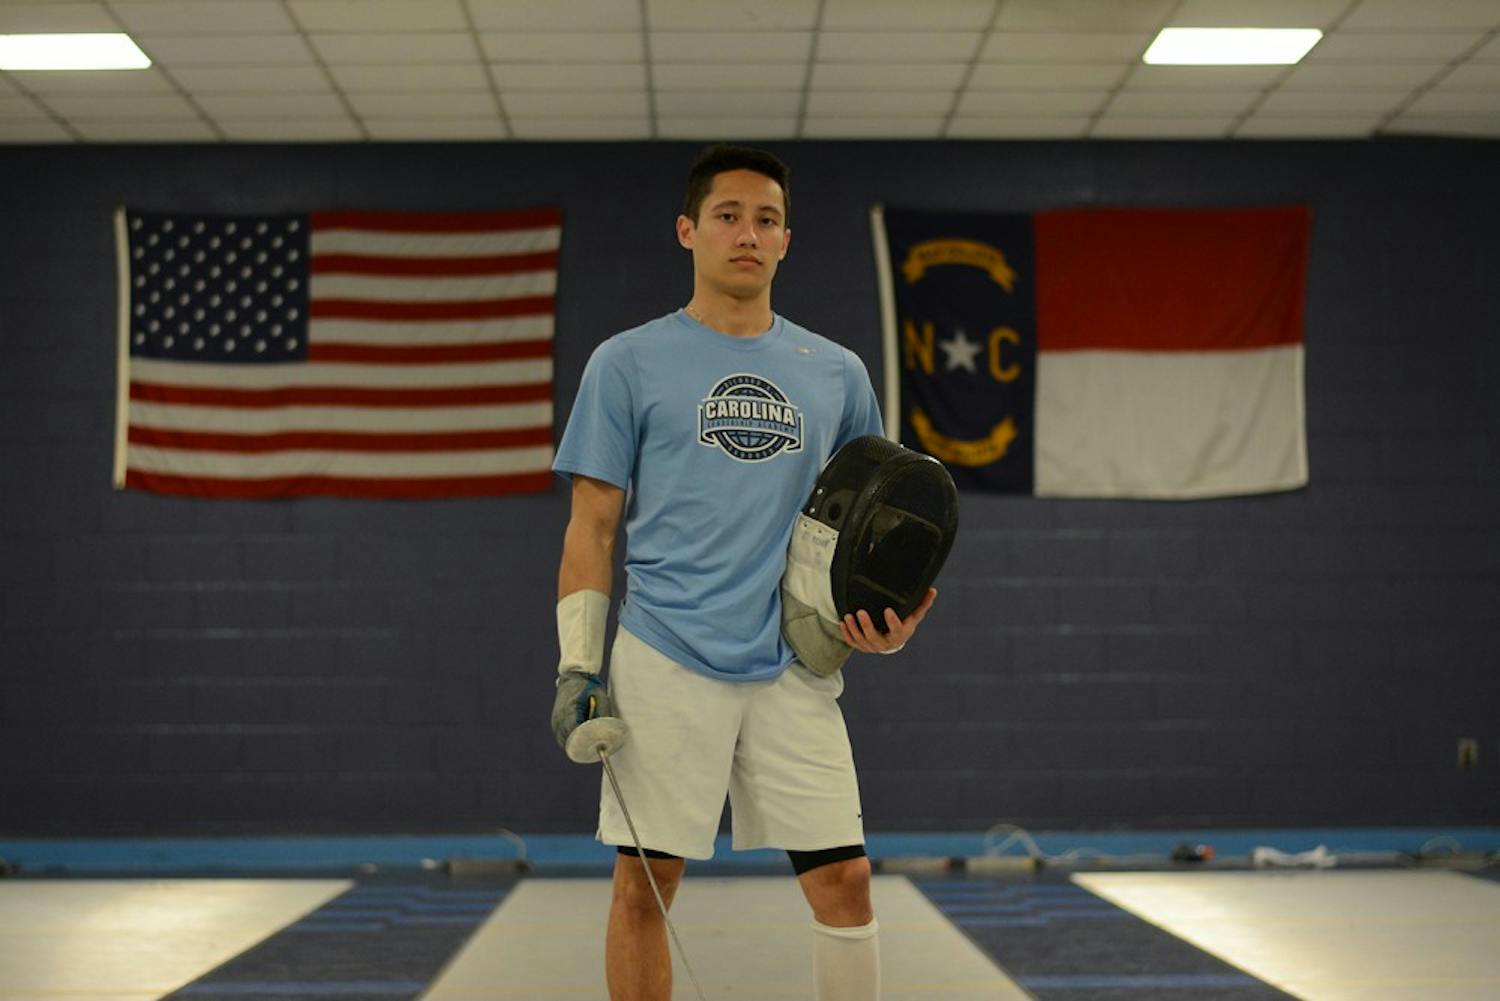 Ezra Baeli-Wang poses with his gear in the fencing room in 2017. The former UNC and ACC Student-Athlete Advisory Committee President wrote an open letter to University officials against Silent Sam that has been signed by almost 300 current and former UNC student-athletes.